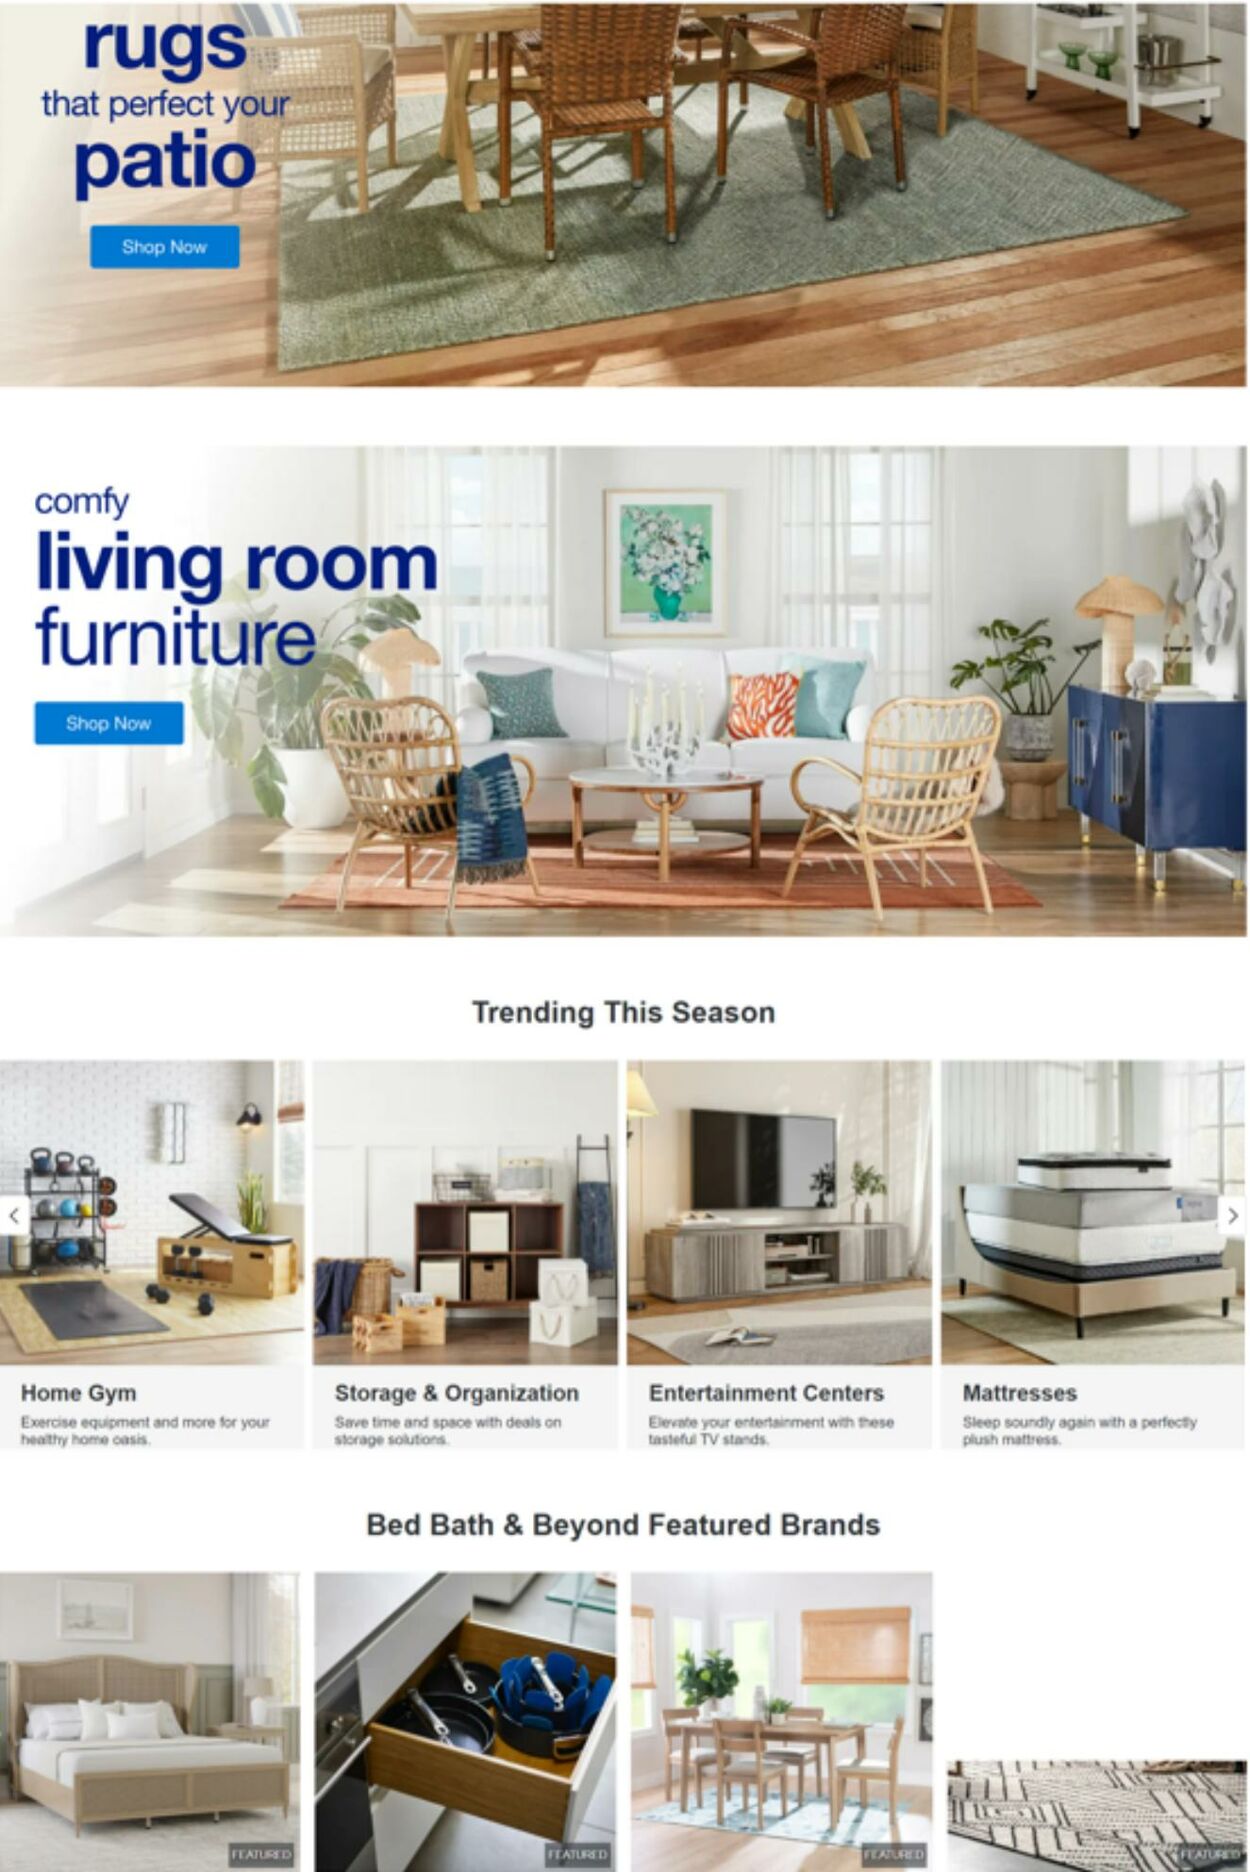 Bed Bath & Beyond Promotional weekly ads